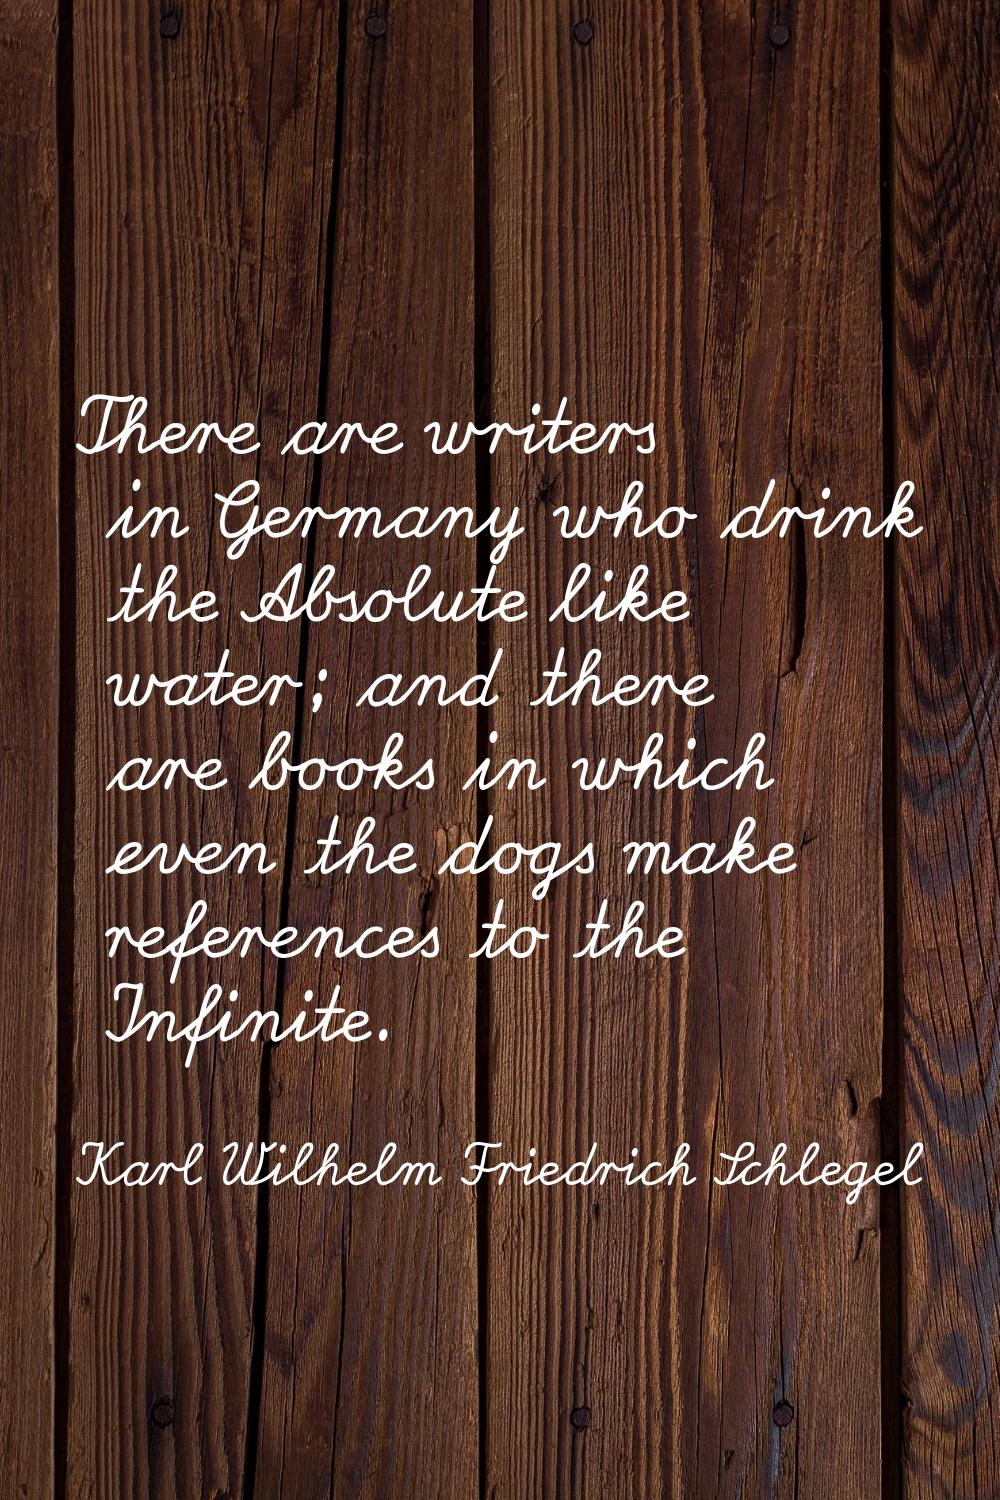 There are writers in Germany who drink the Absolute like water; and there are books in which even t